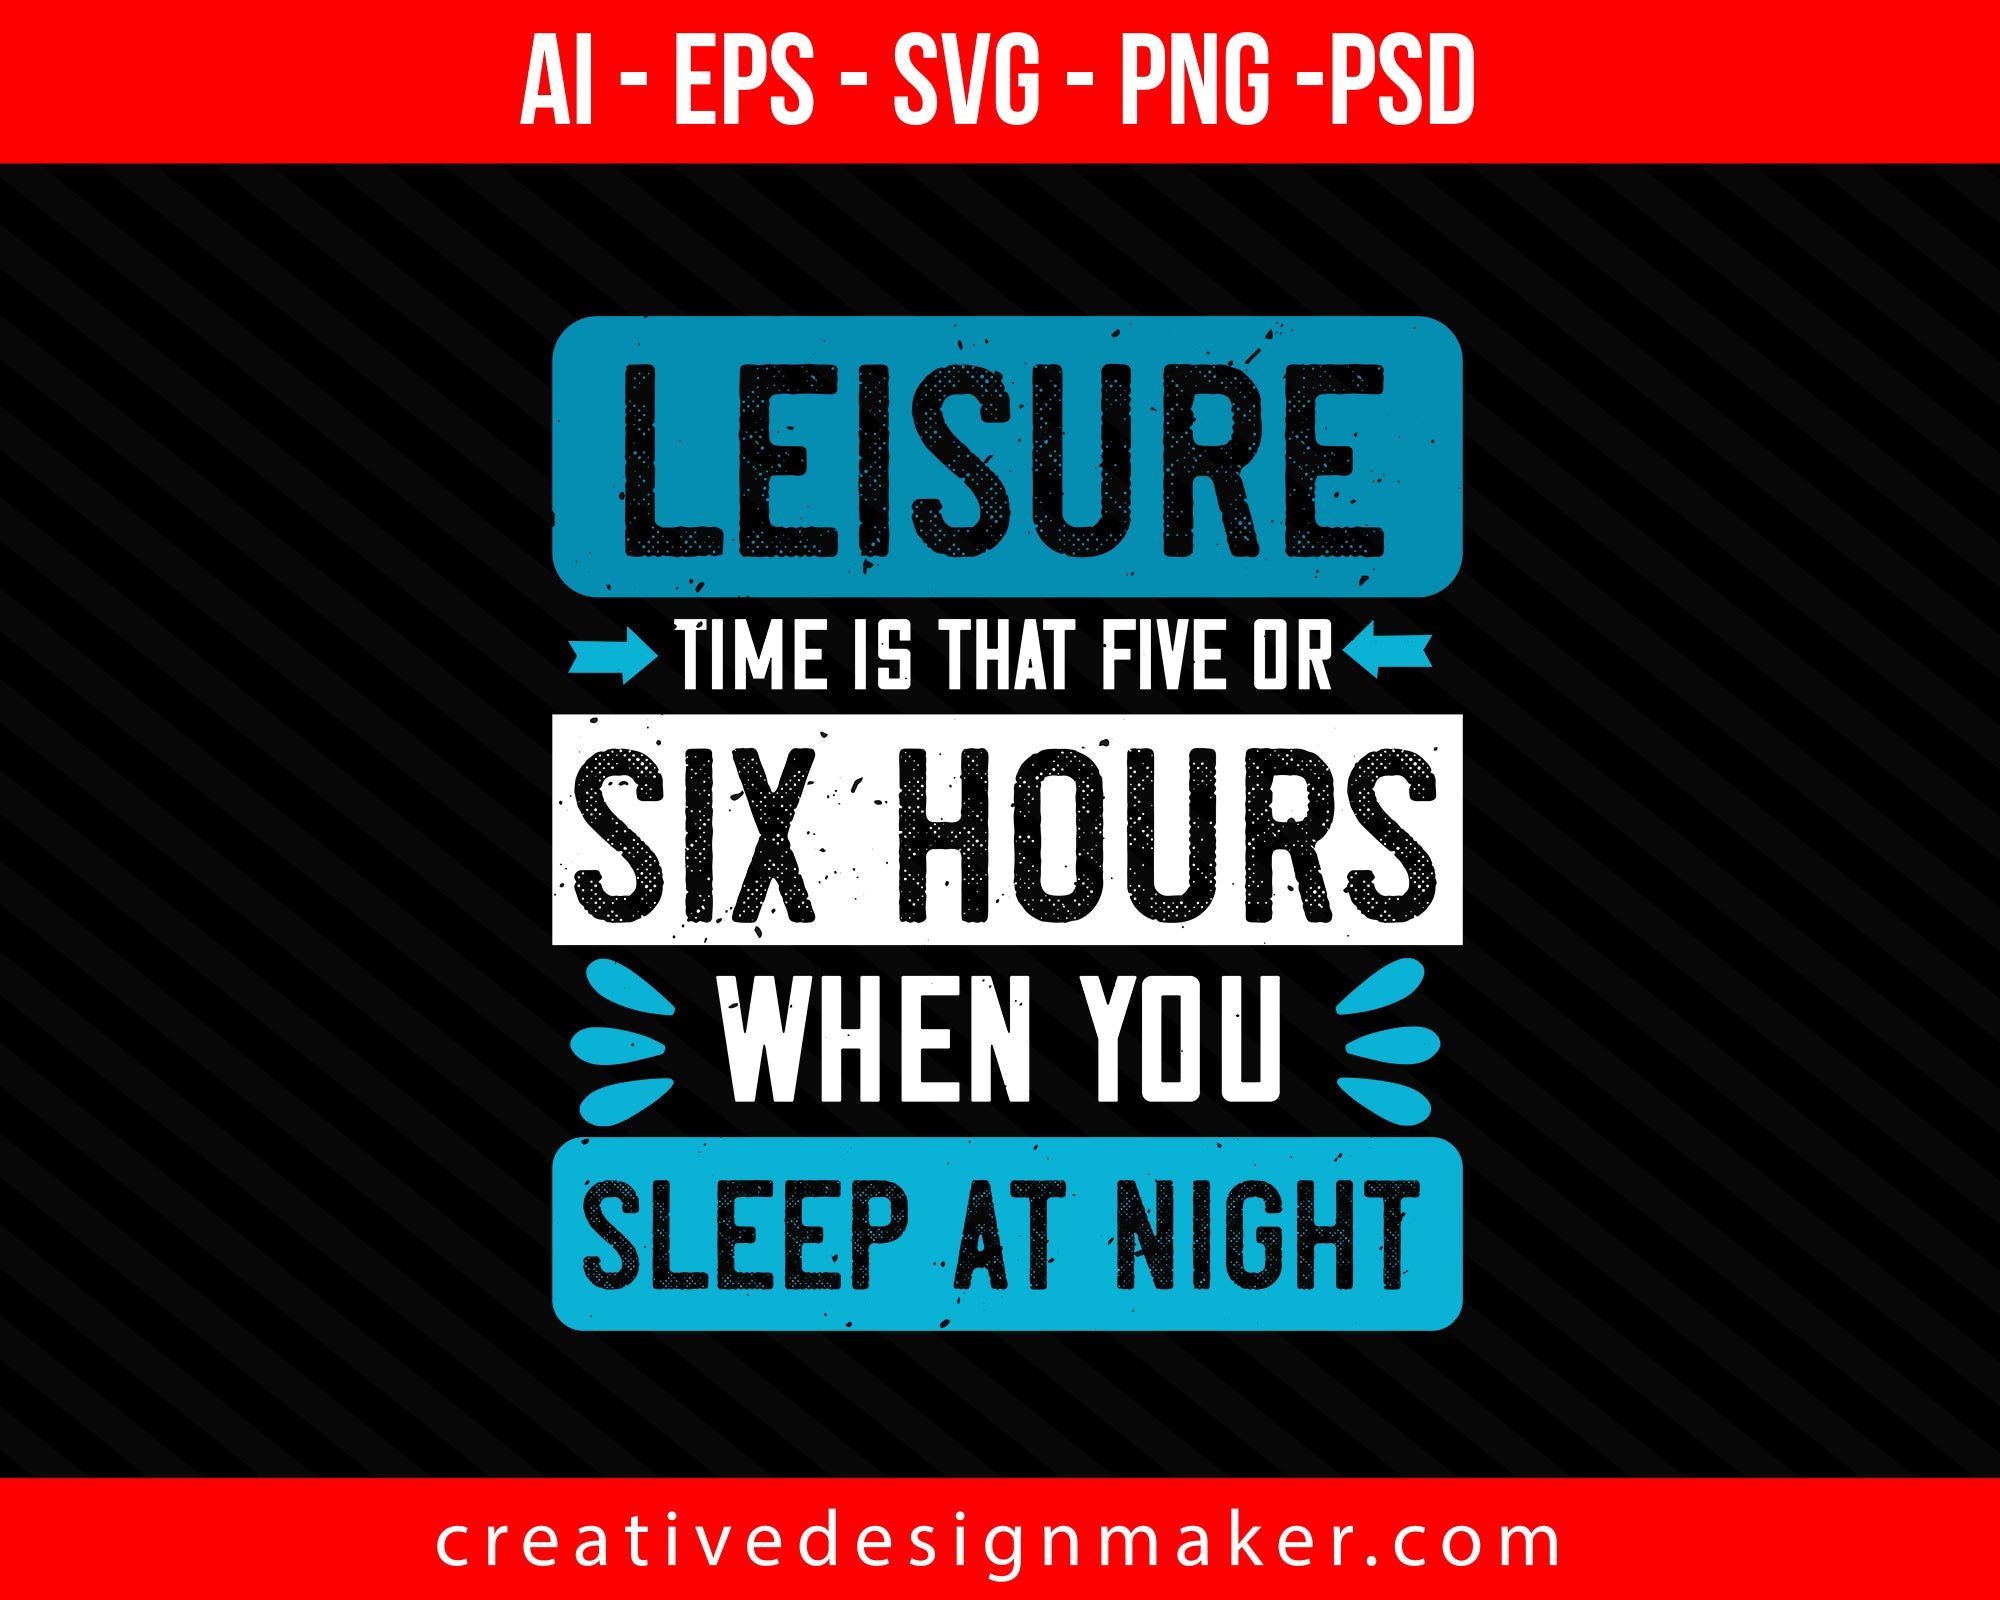 Leisure time is that five or six hours when you sleep at night Print Ready Editable T-Shirt SVG Design!